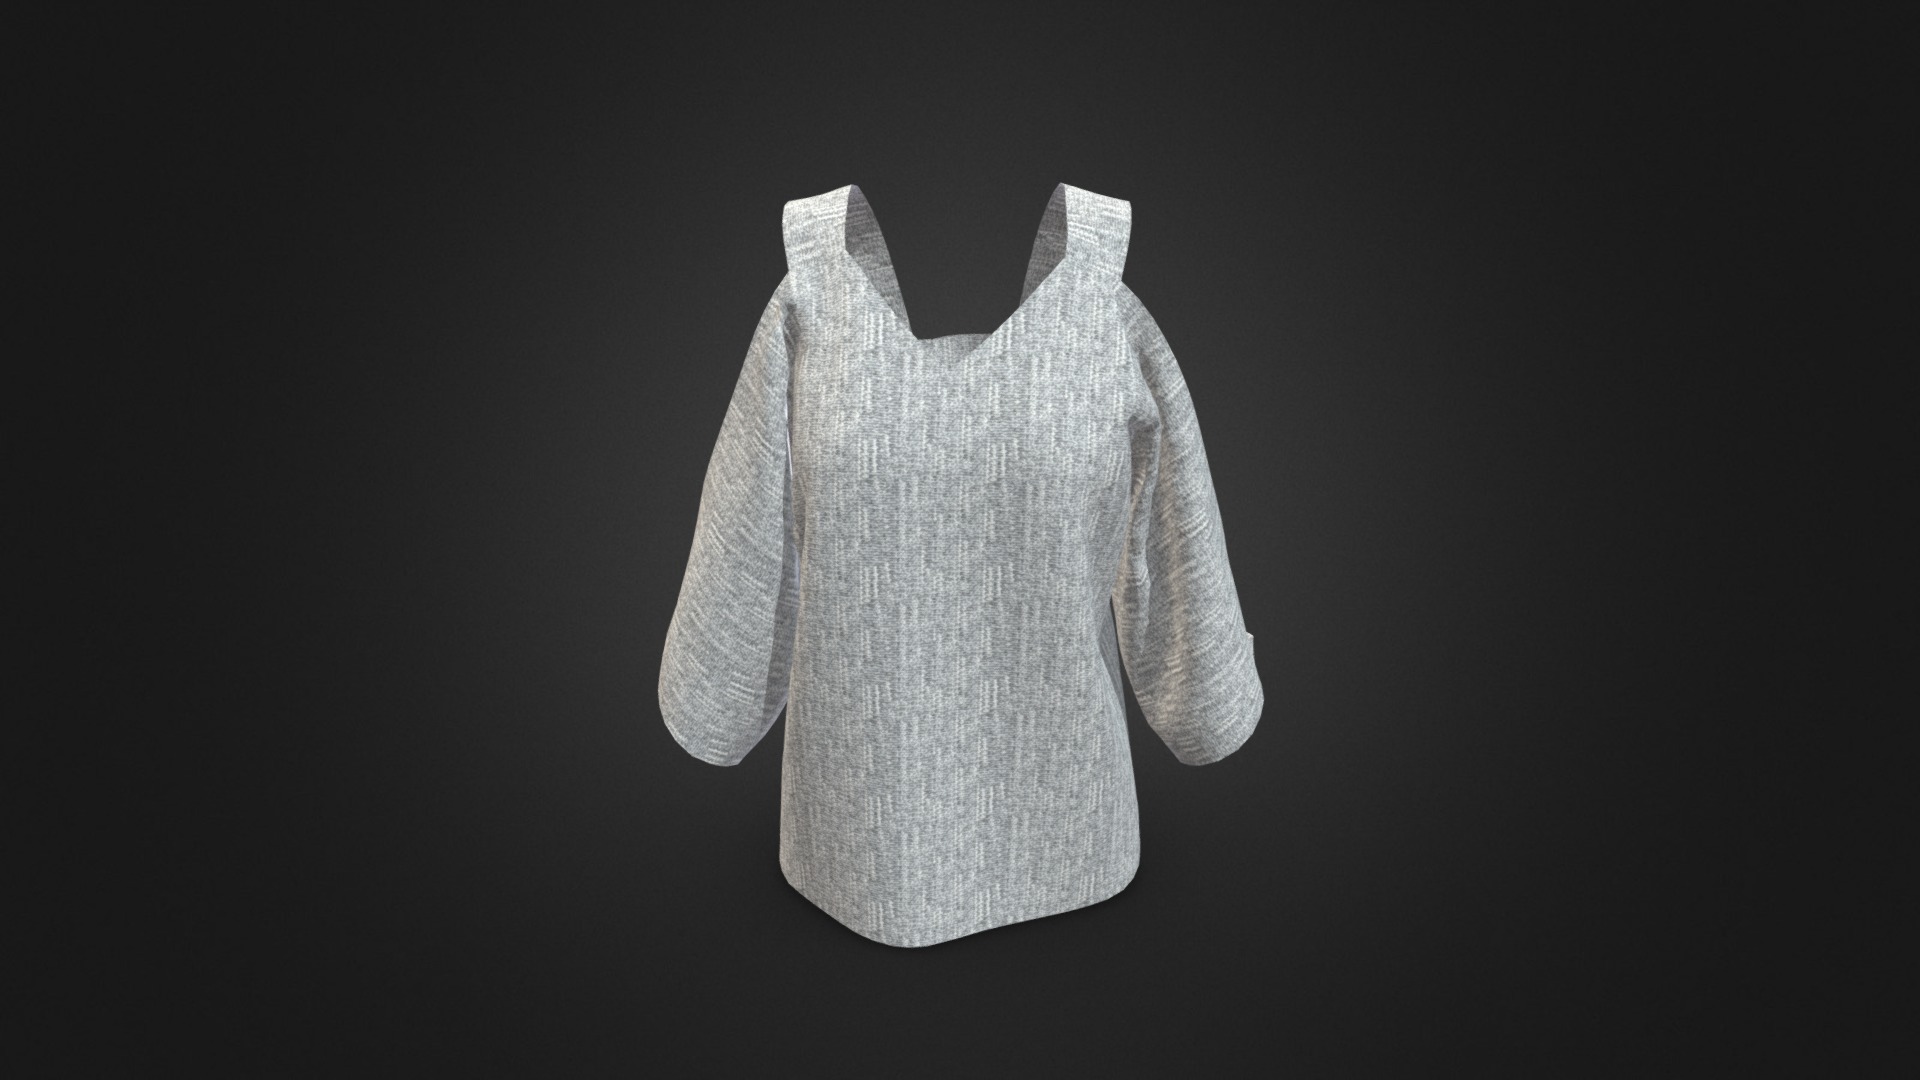 3D model open-retail shirt - This is a 3D model of the open-retail shirt. The 3D model is about a white towel on a black background.